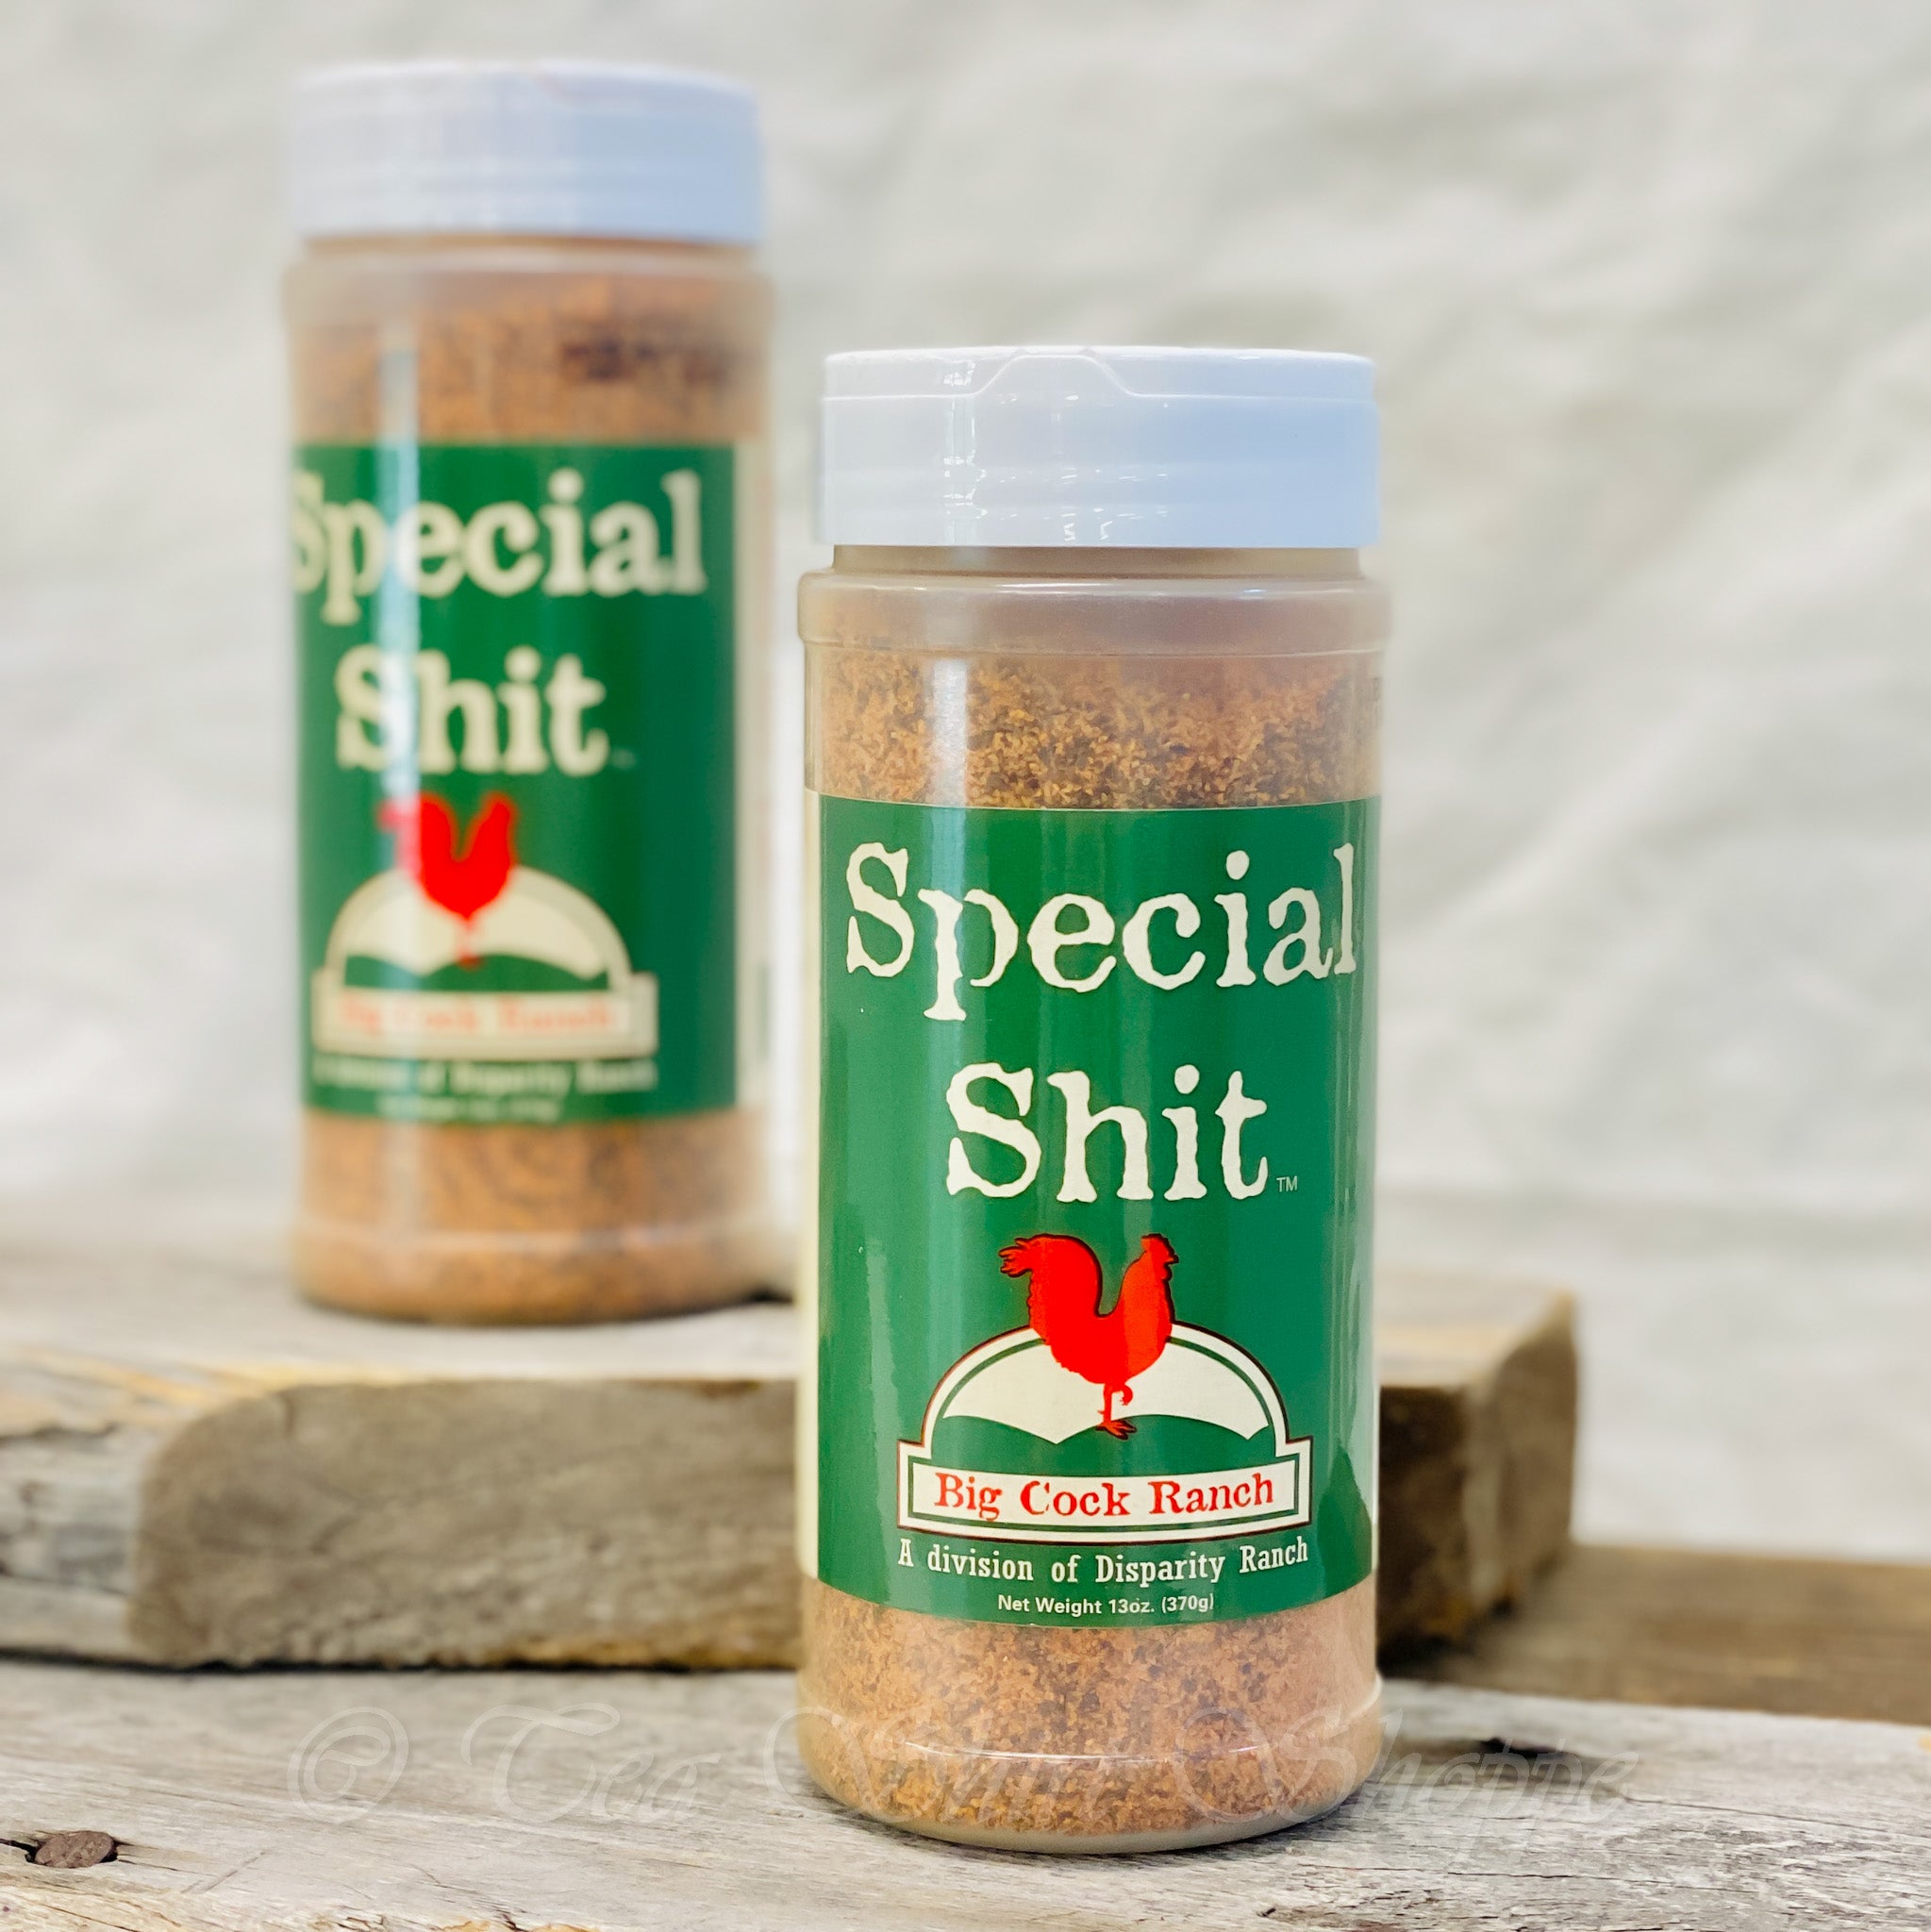 Special Shit Seasoning Review 